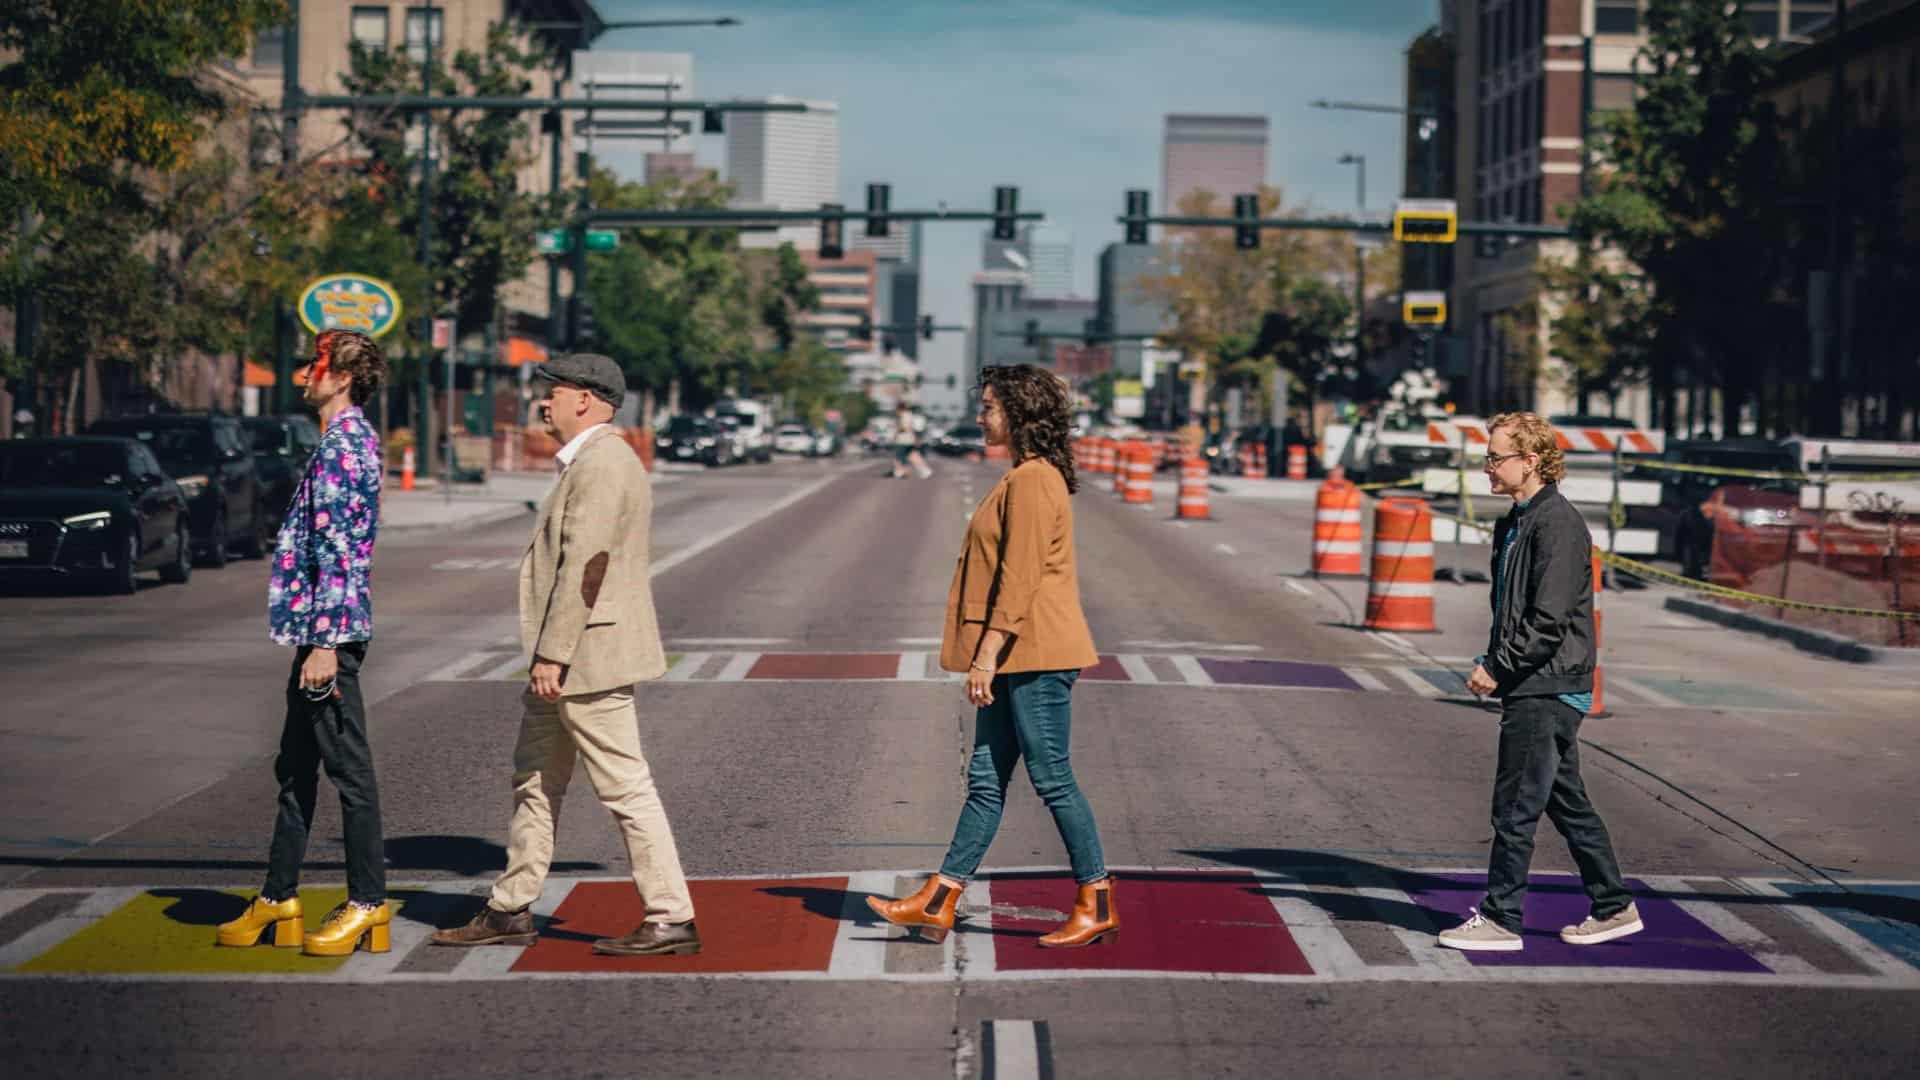 The 4 members of the band Avourneen cross a street walking along a crosswalk in formal clothes, imitating the Beatles' Abbey Road album cover,